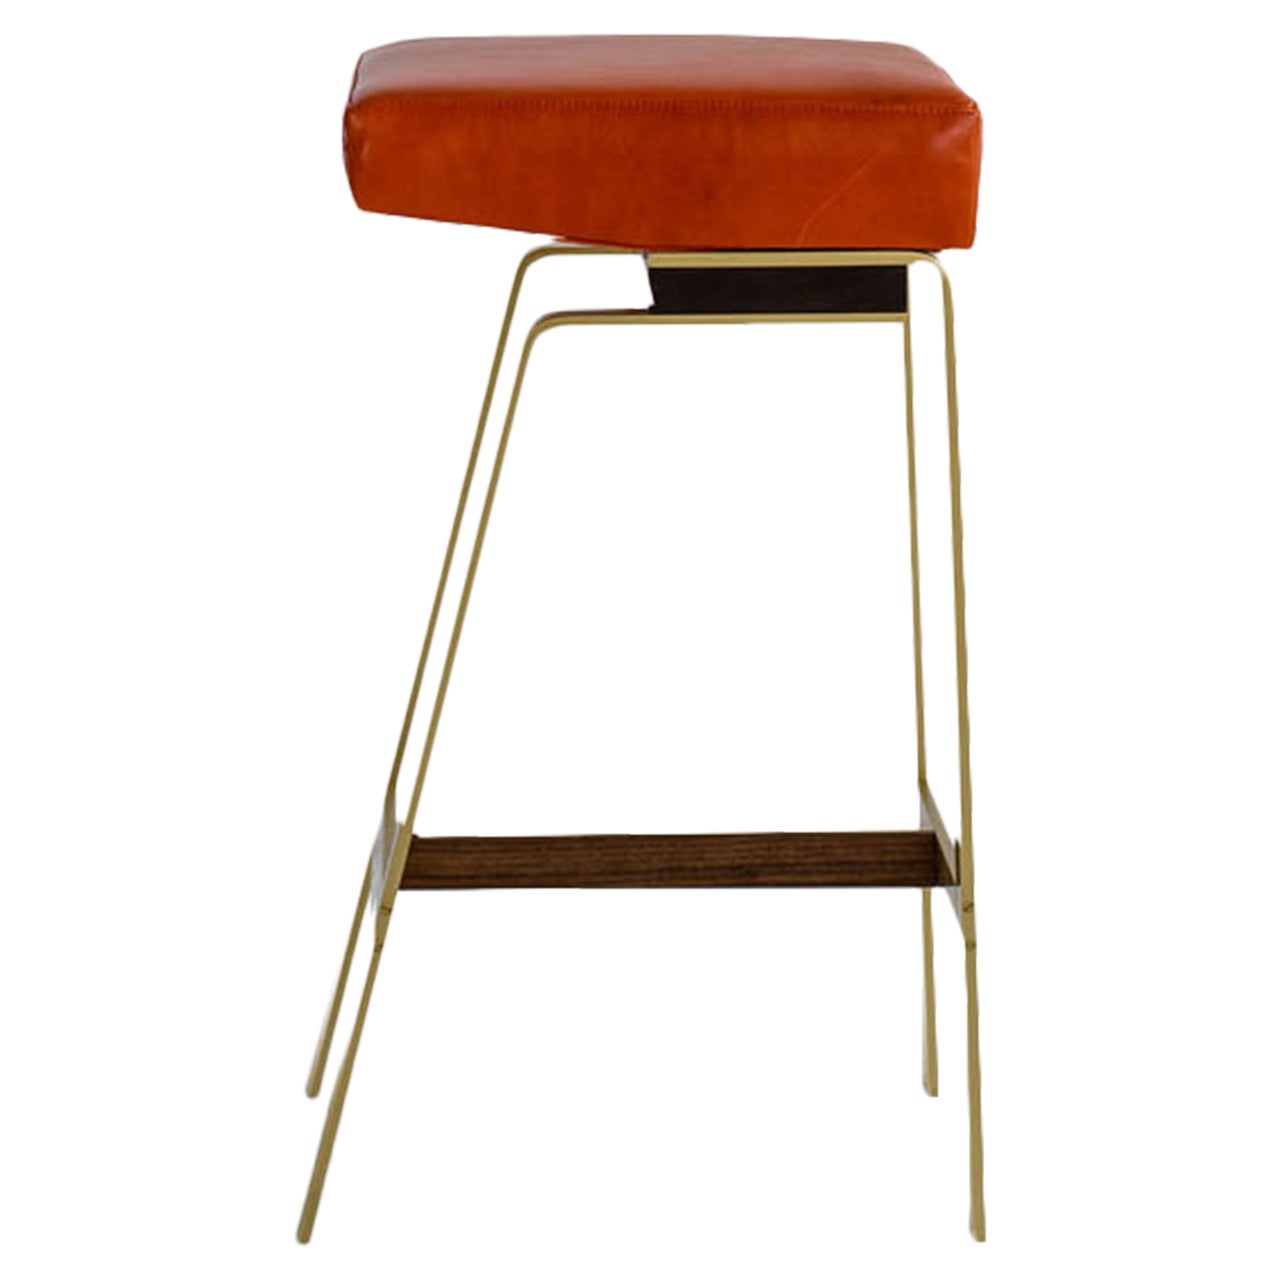 Gavilan Barstool, Solid Brass Base with Walnut Details and Orange Leather